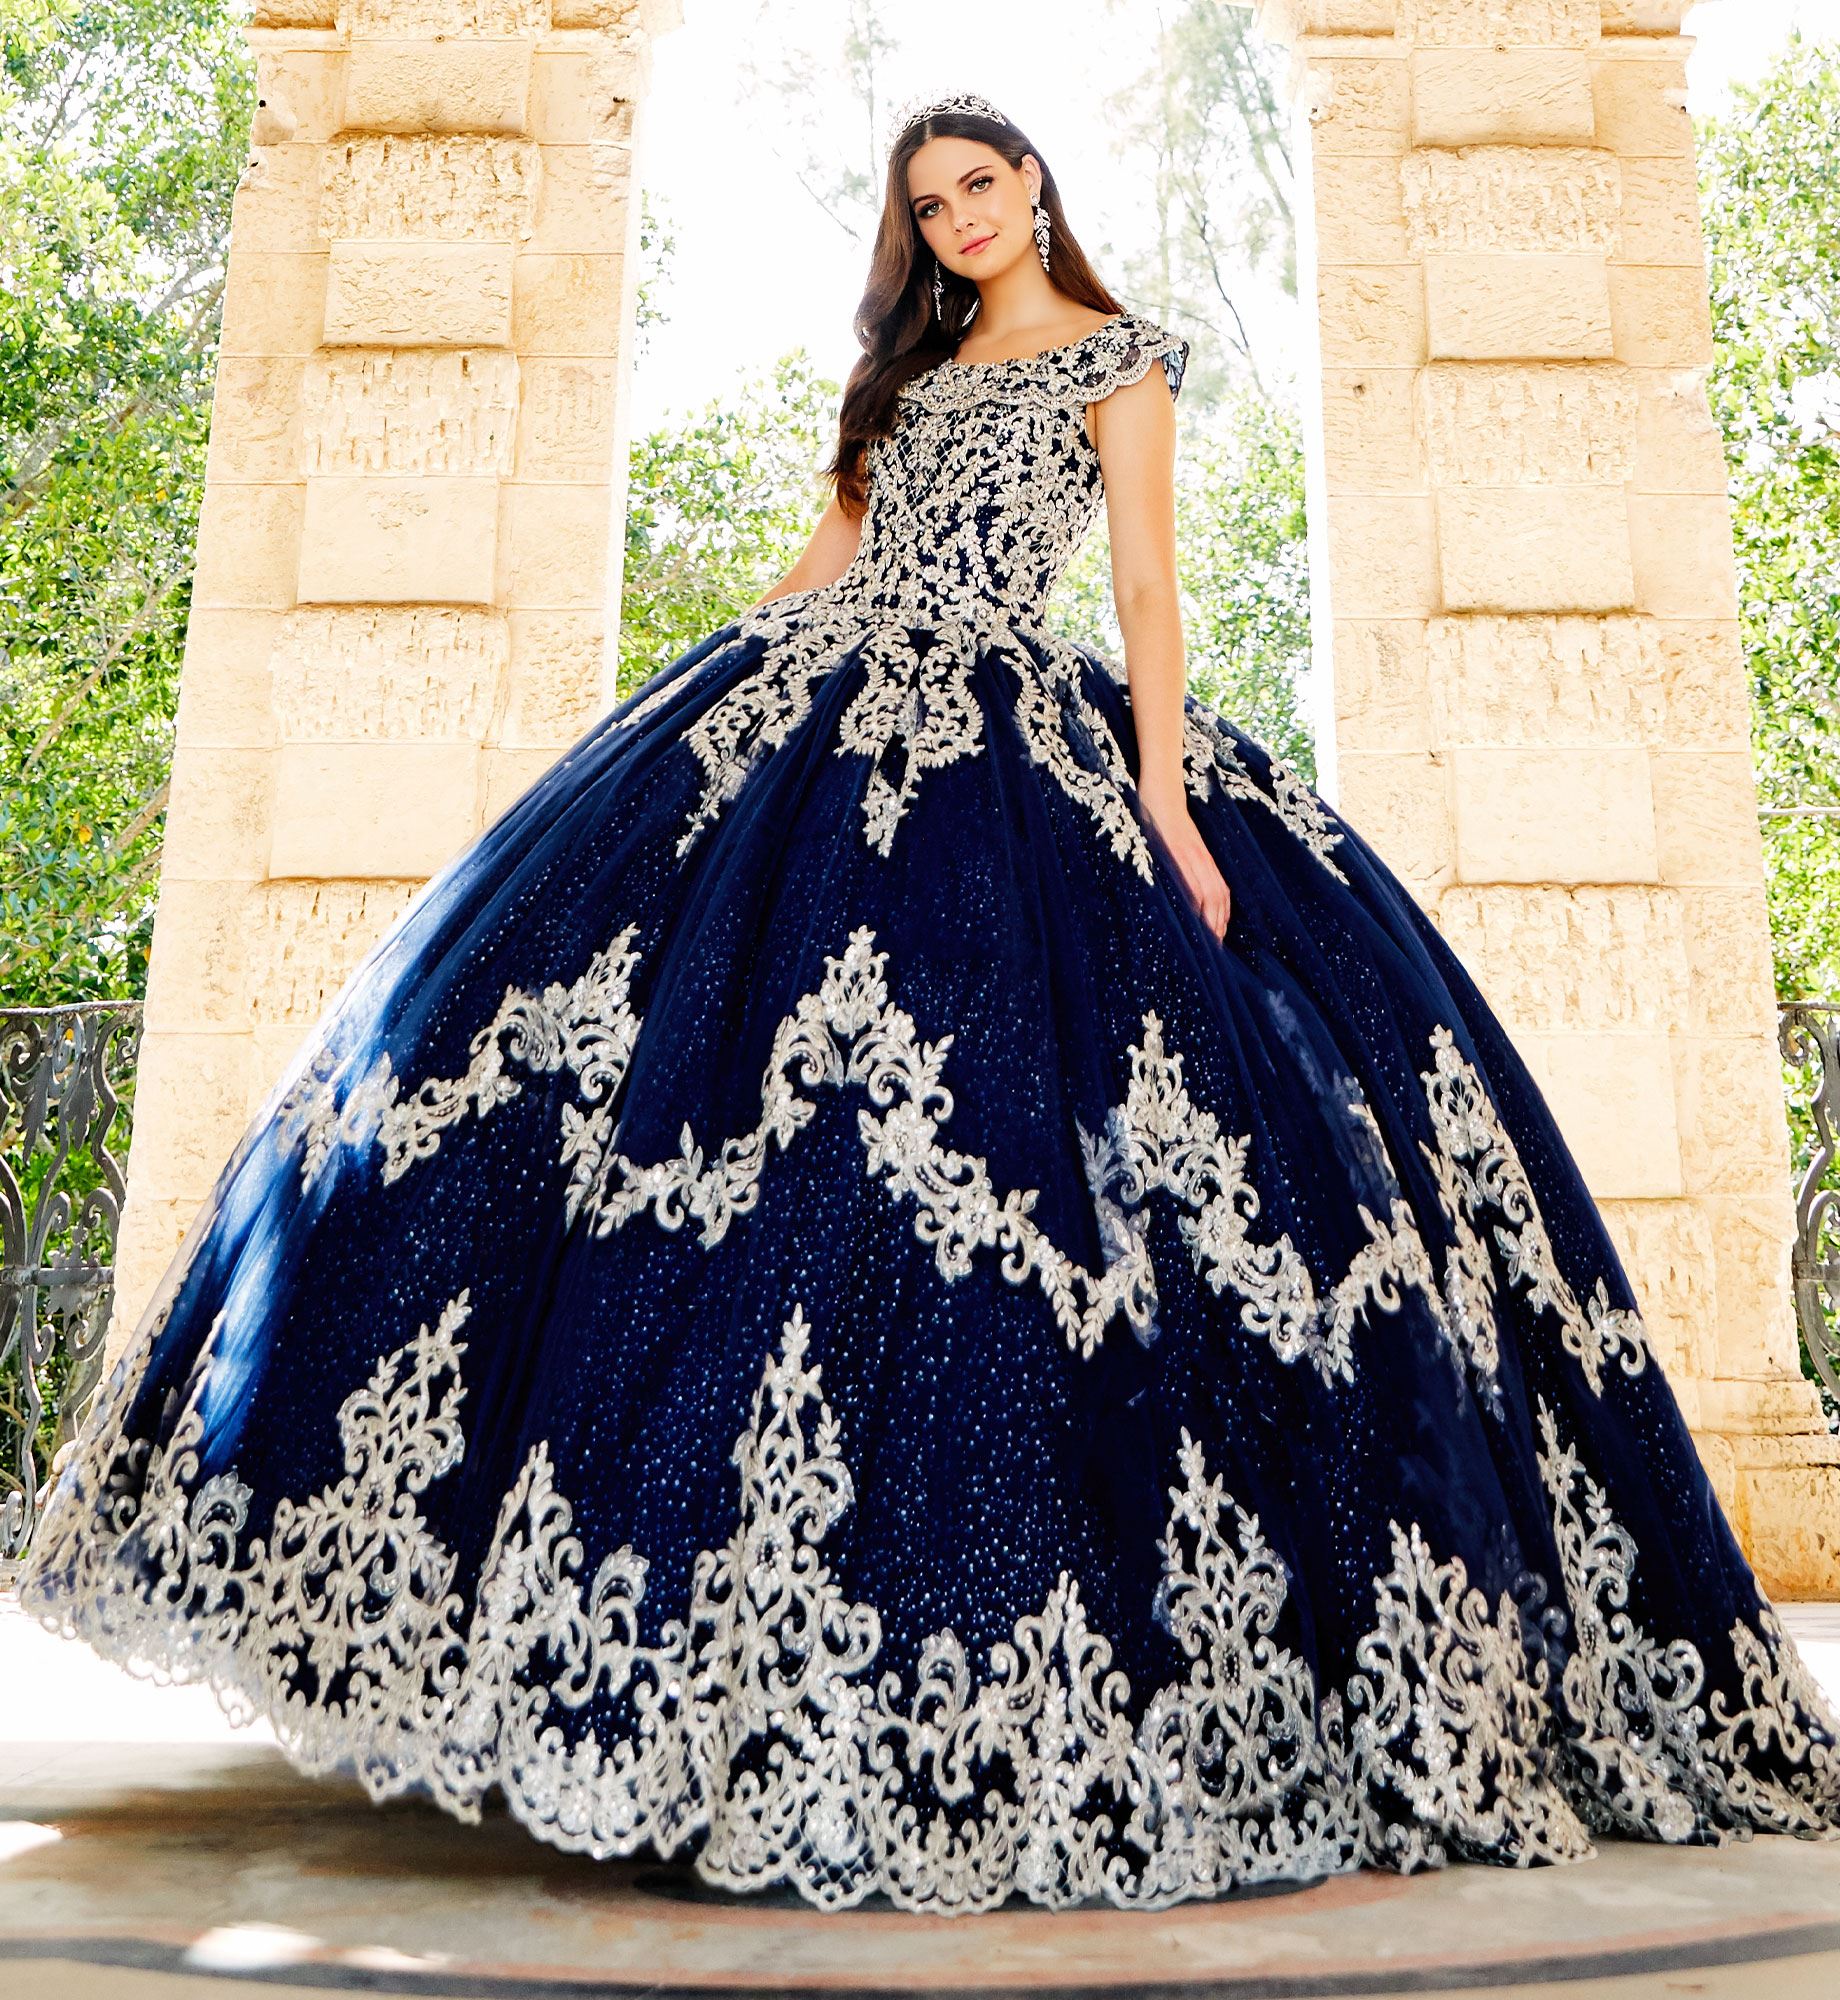 Brunette model in dark blue quinceañera dress with silver lace embroidery